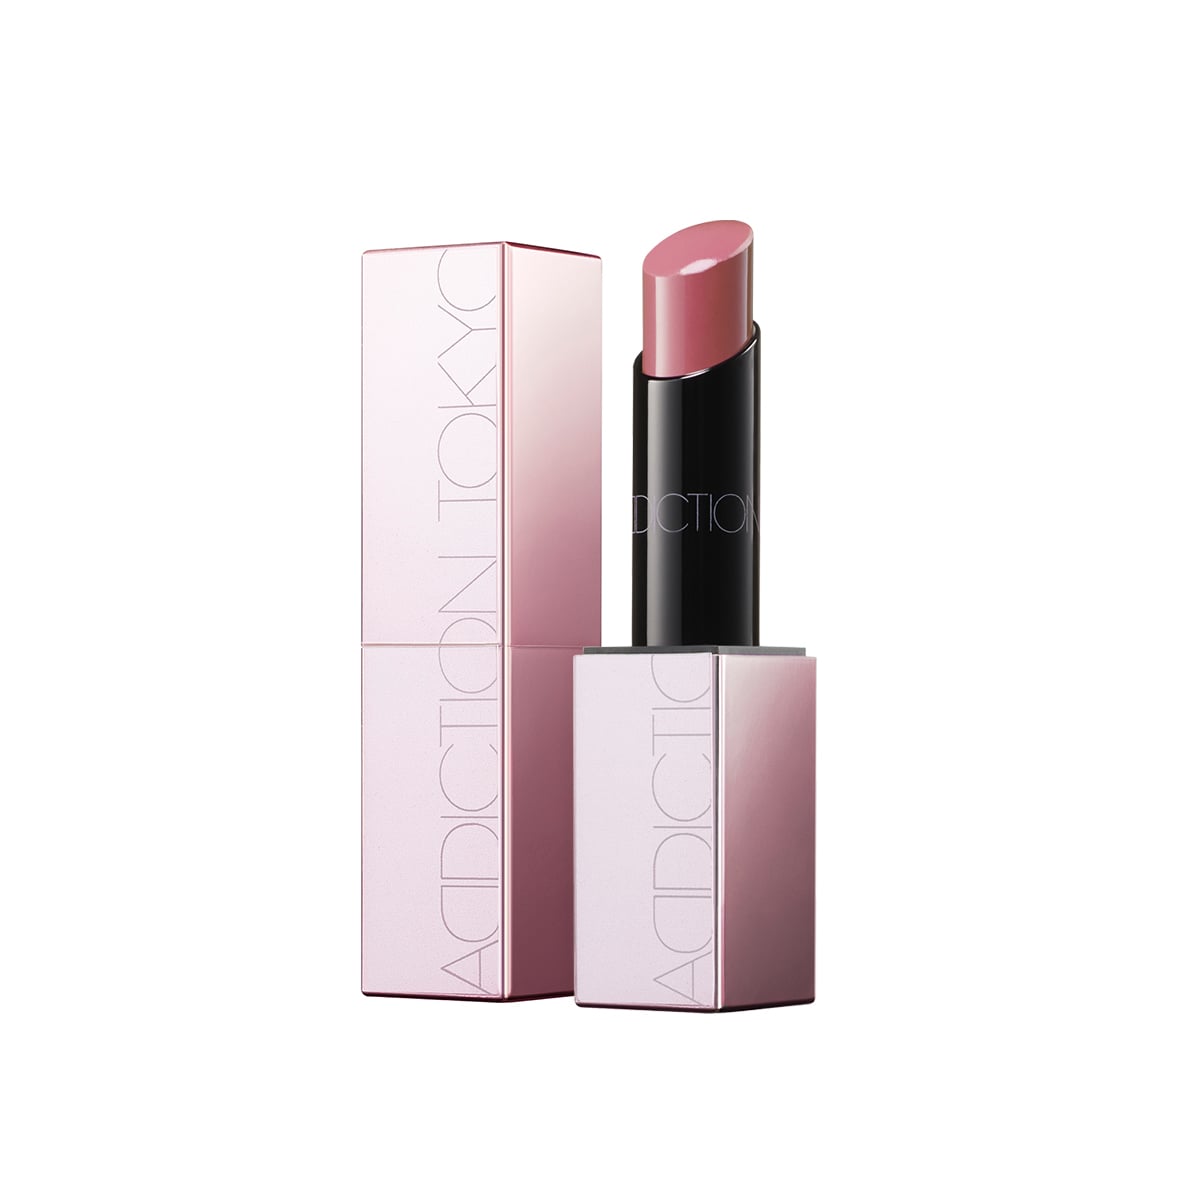 THE LIPSTICK EXTREME SHINE “ETERNAL IN PINK”